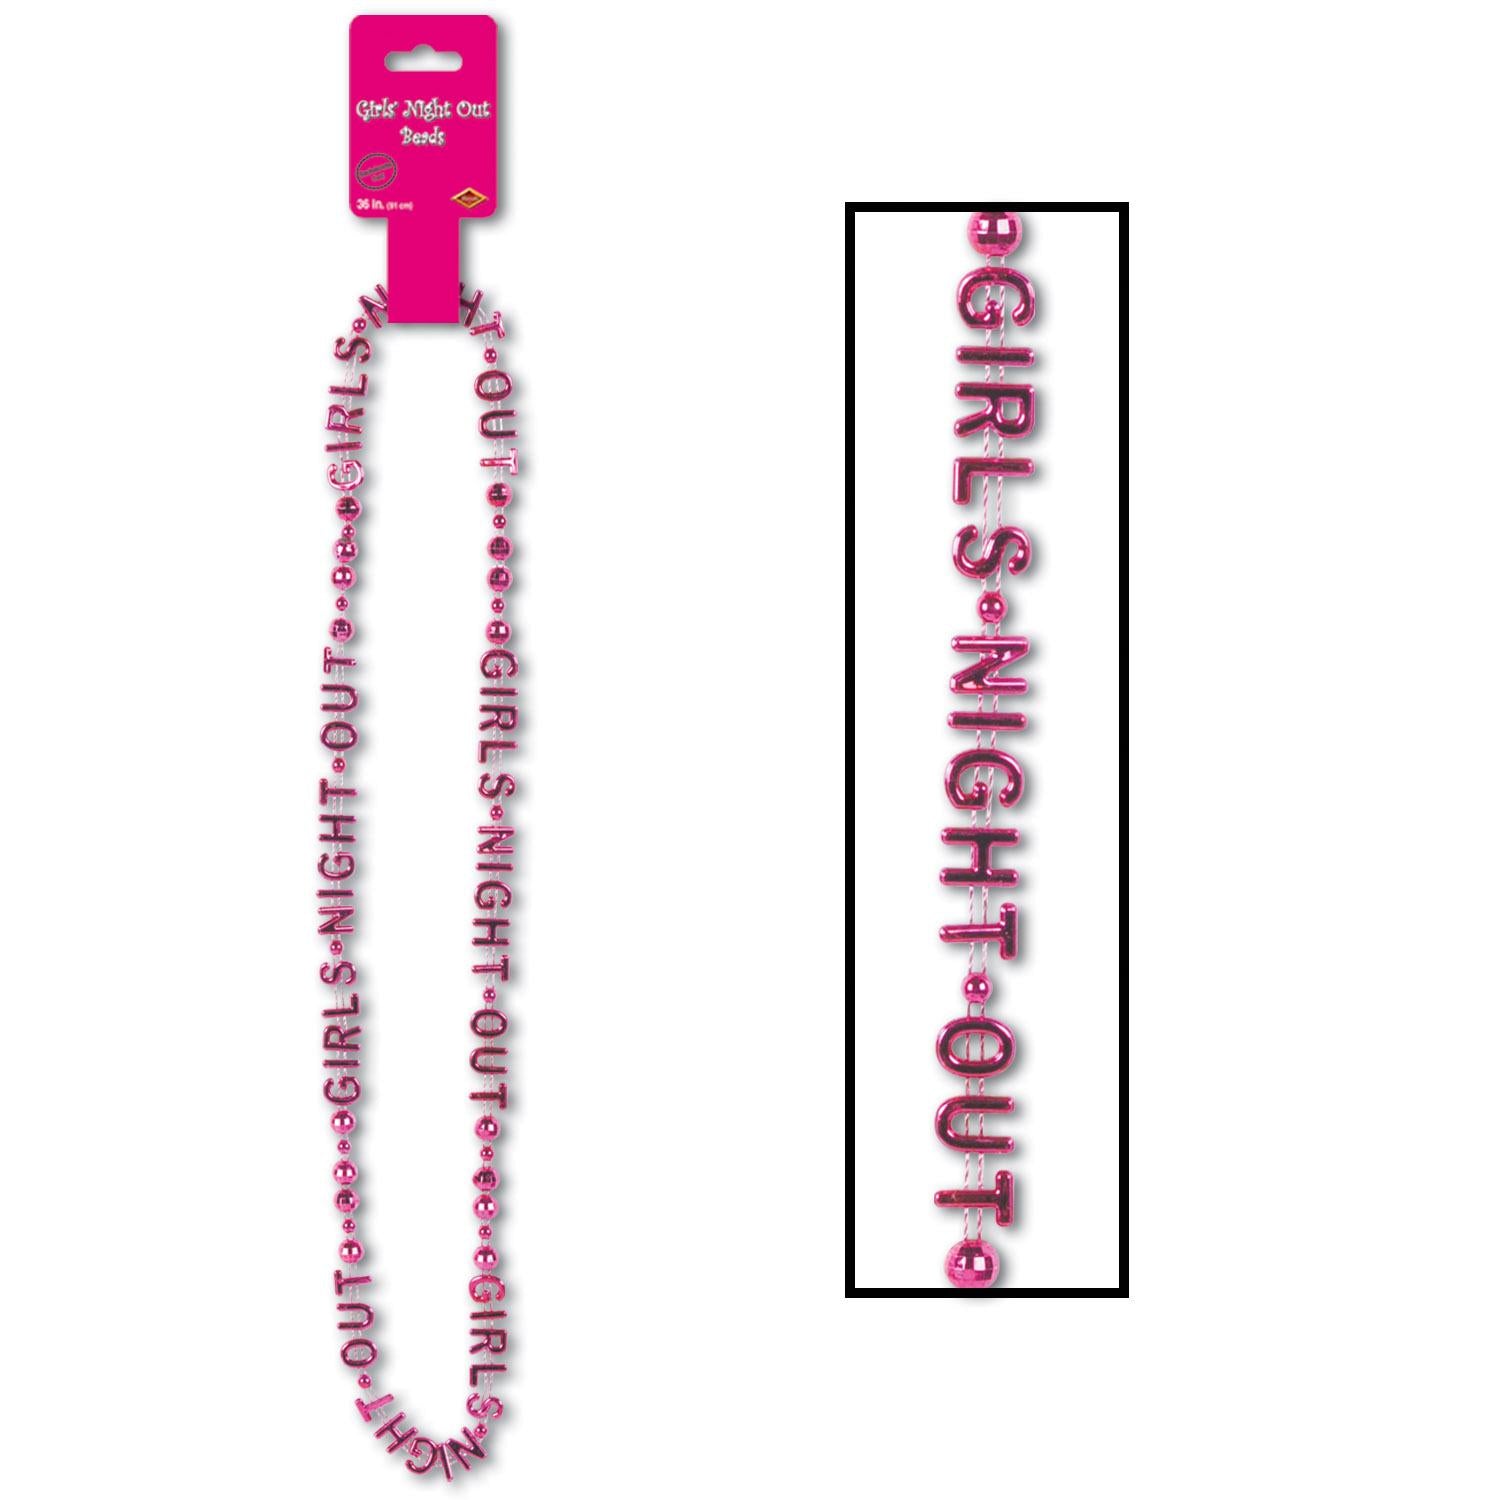 Beistle Bachelorette Party Girls' Night Out Bead Necklaces